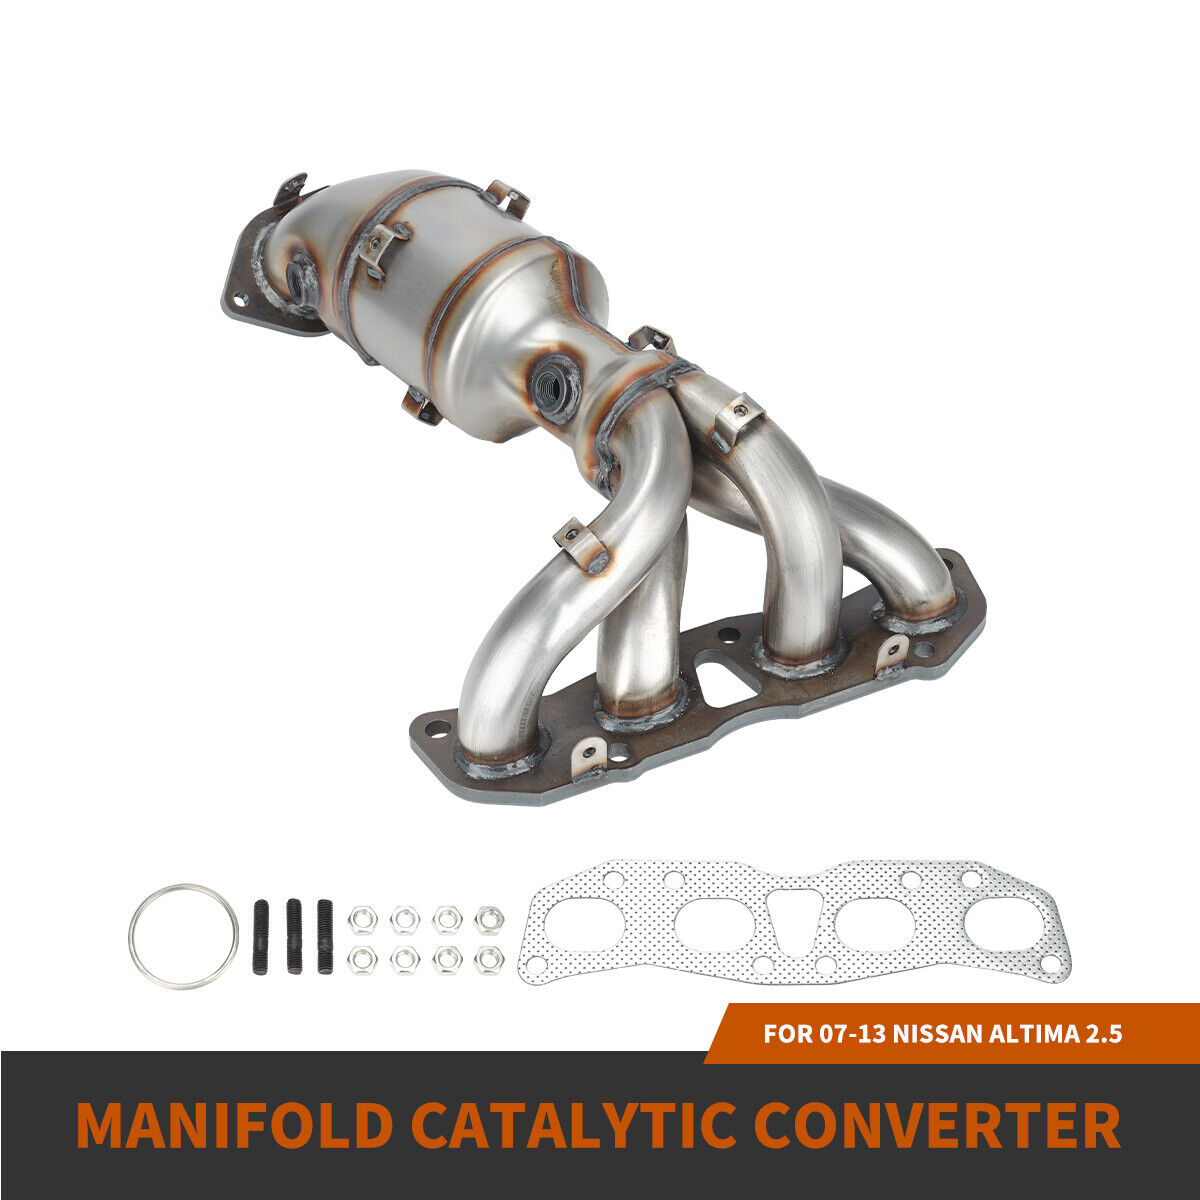 CATALYTIC CONVERTER EXHAUST MANIFOLD FOR NISSAN ALTIMA 2.5L FACTORY STYLE 07-12